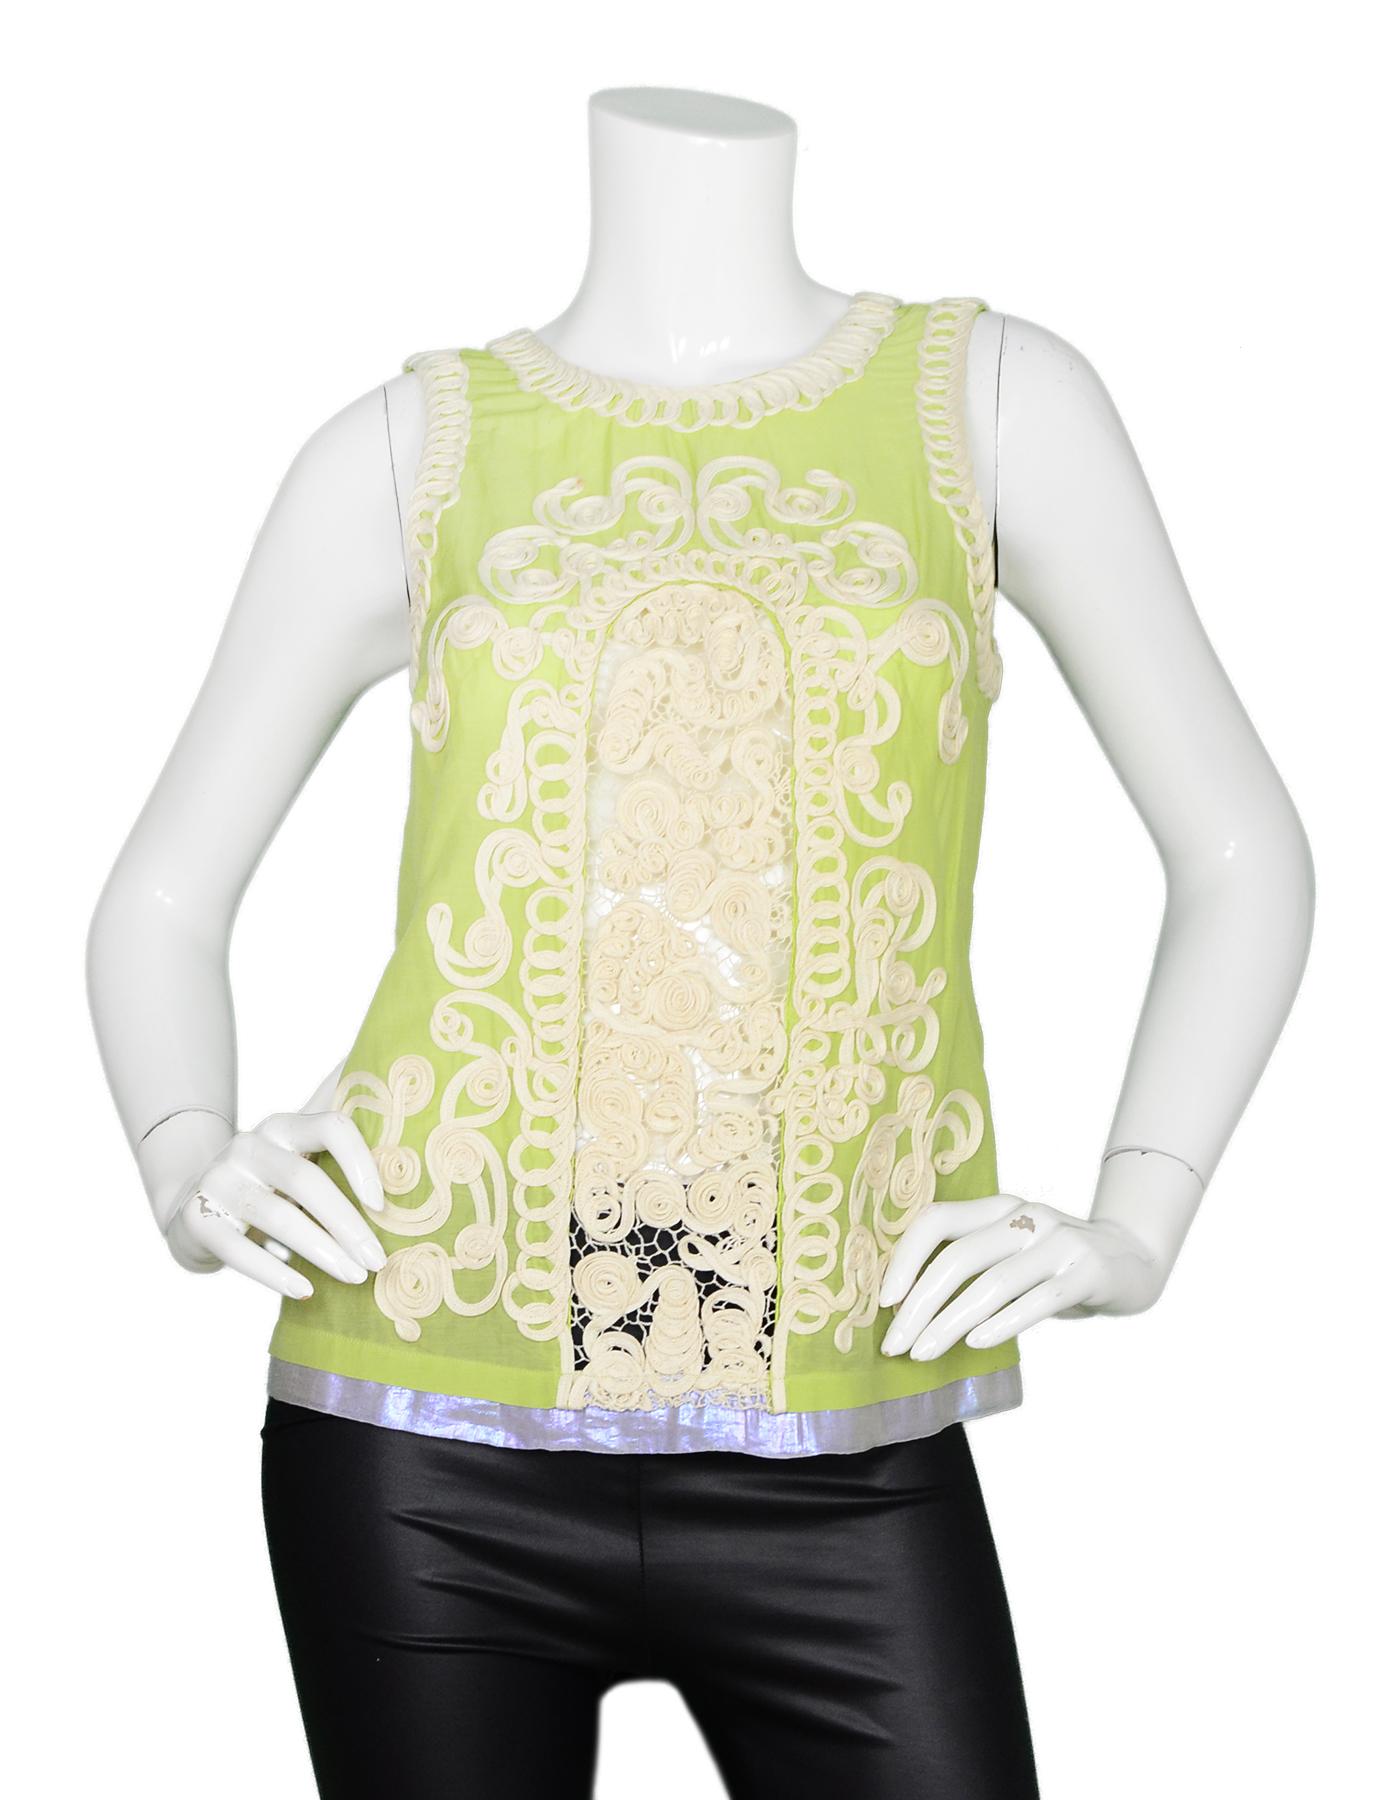 La Perla Green Embroidered Sleeveless Top Sz 42

Made In: Italy
Color: Green, ivory 
Materials: 75% cotton, 25% silk
Opening/Closure: Button up back
Overall Condition: Very good pre-owned condition with exception of some staining on front, see